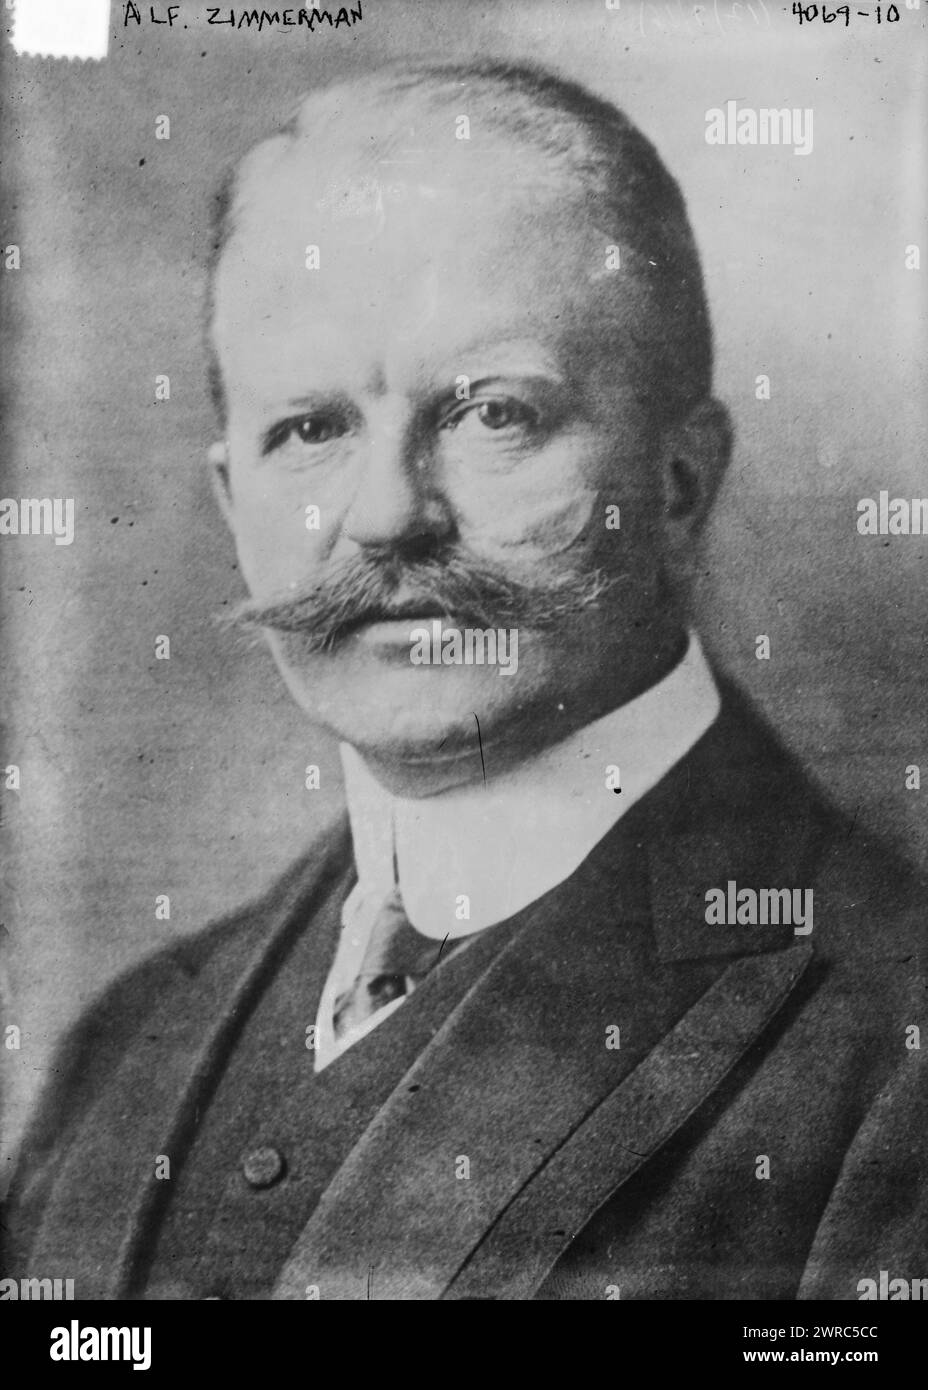 Alf. i.e. Arthur Zimmerman, Photograph shows Arthur Zimmermann (1864-1940) who served as State Secretary for Foreign Affairs of Germany (1916-1917)., between ca. 1915 and ca. 1920, Glass negatives, 1 negative: glass Stock Photo